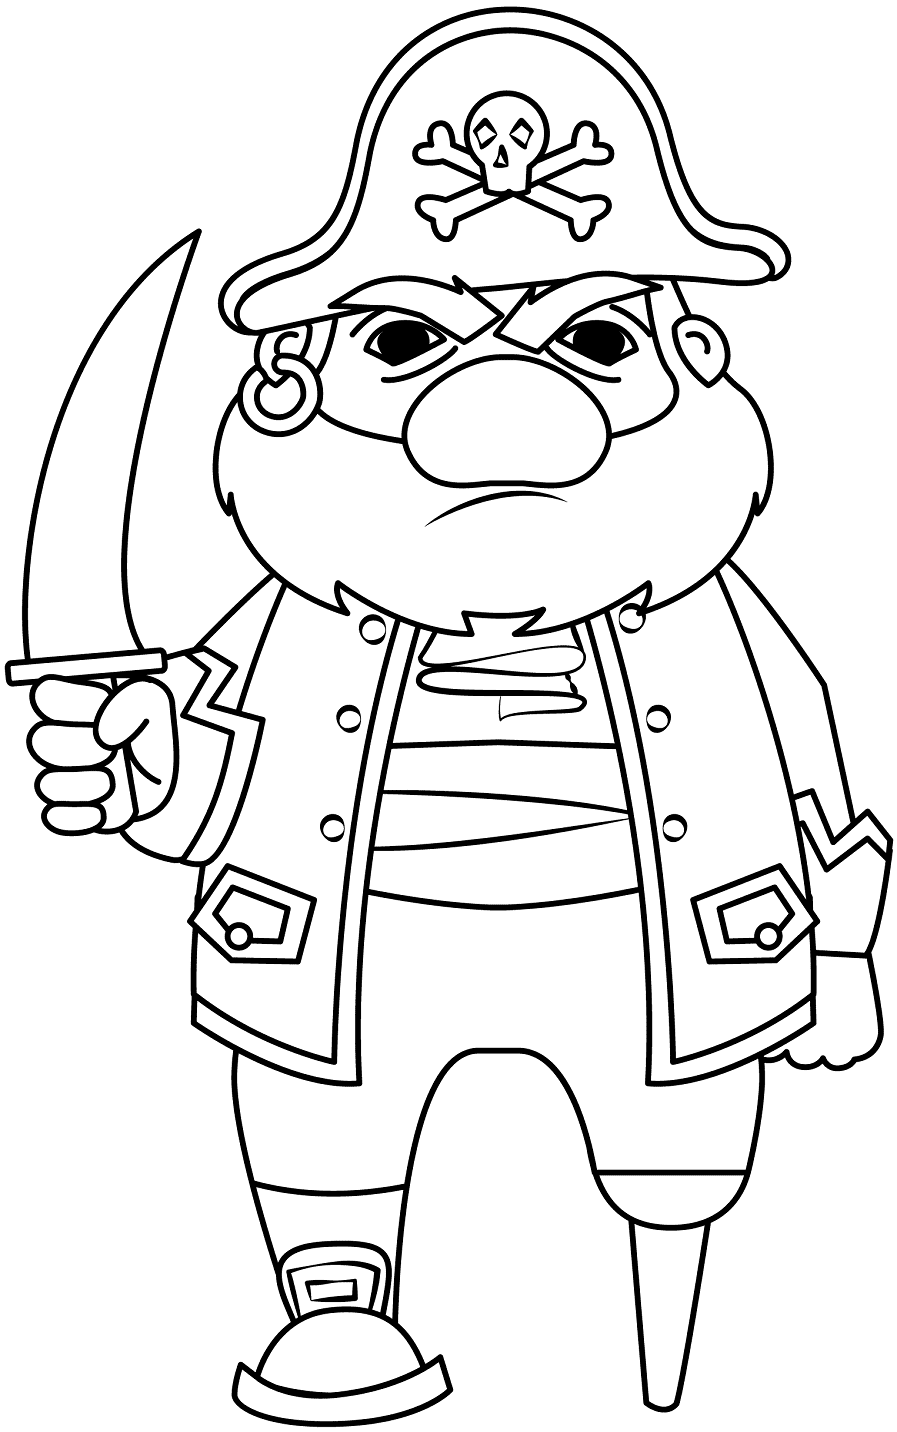 Pirate for Kids Coloring Page